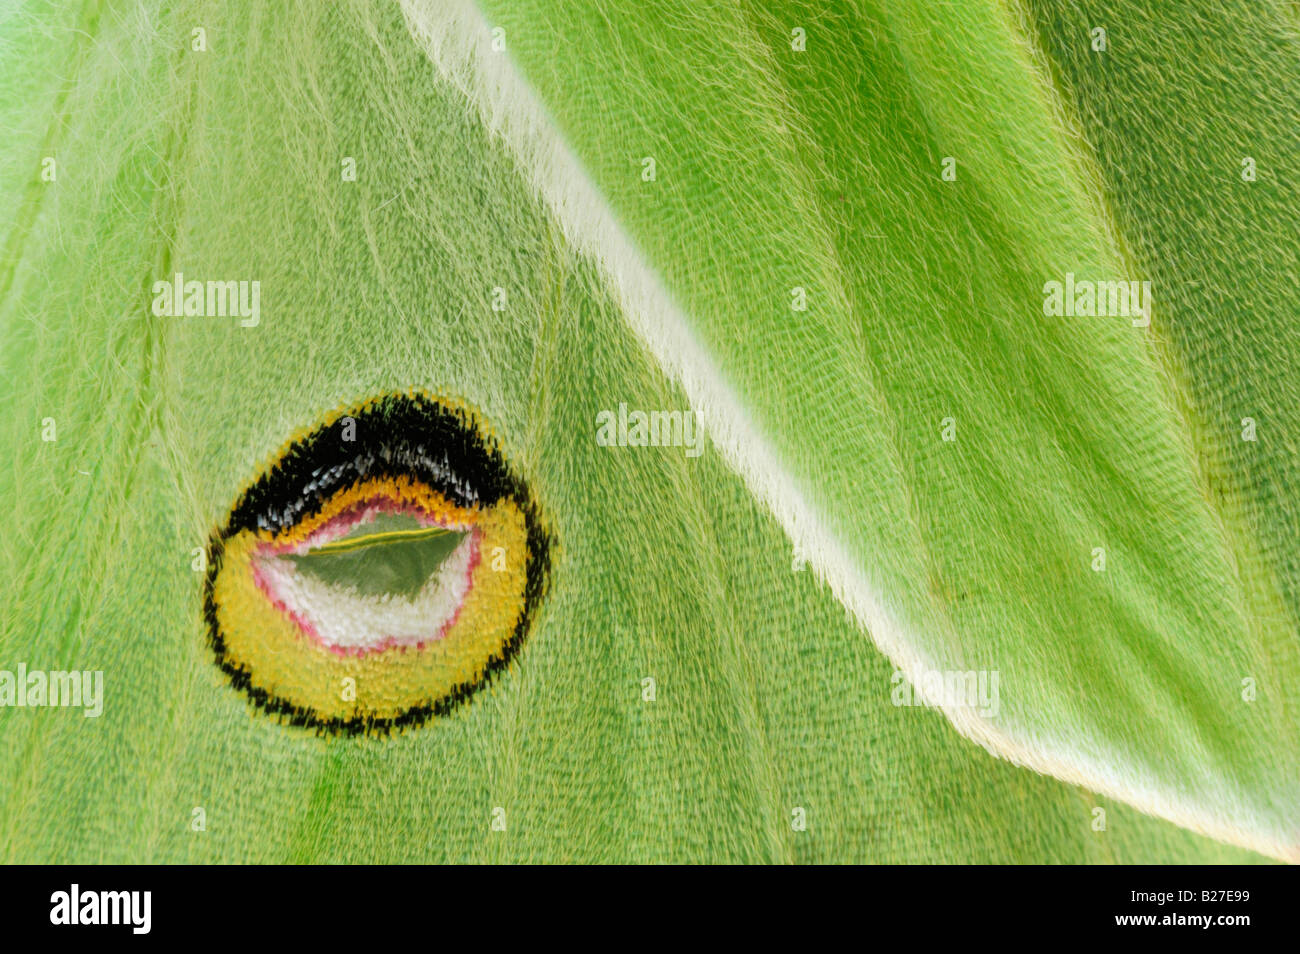 Luna Moth Actias luna close up of eyespots on back wings New Braunfels Texas USA March 2008 Stock Photo